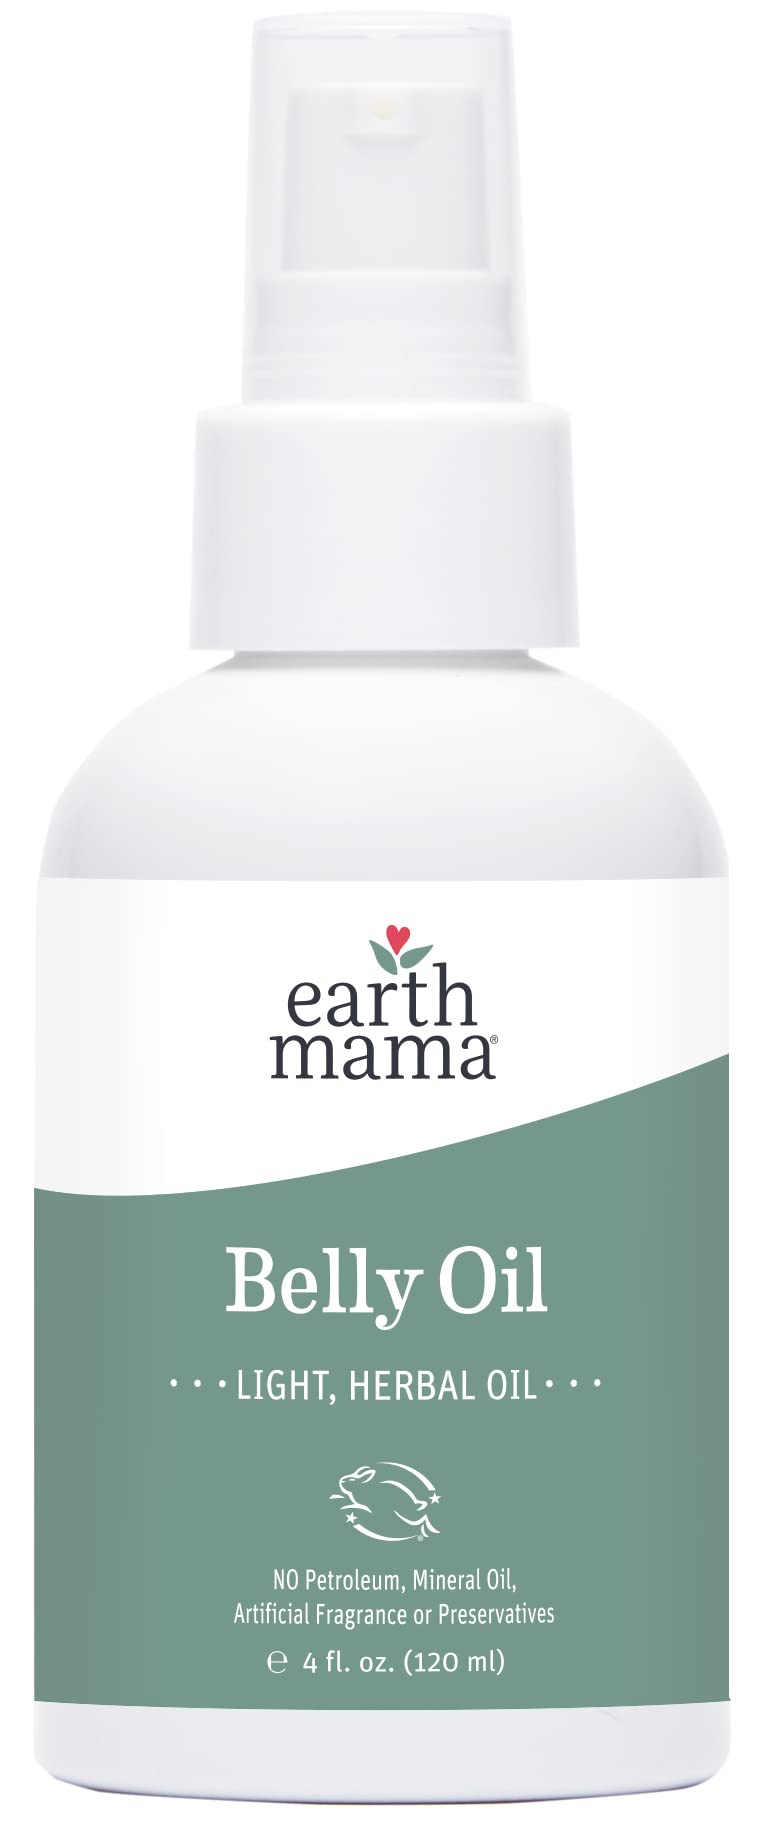 Earth Mama Belly Butter & Belly Oil Bundle for Dry, Stretching Skin | Moisturize + Encourage Skin's Natural Elasticity During Pregnancy & Beyond, 8-Fluid Ounce & 4-Fluid Ounce